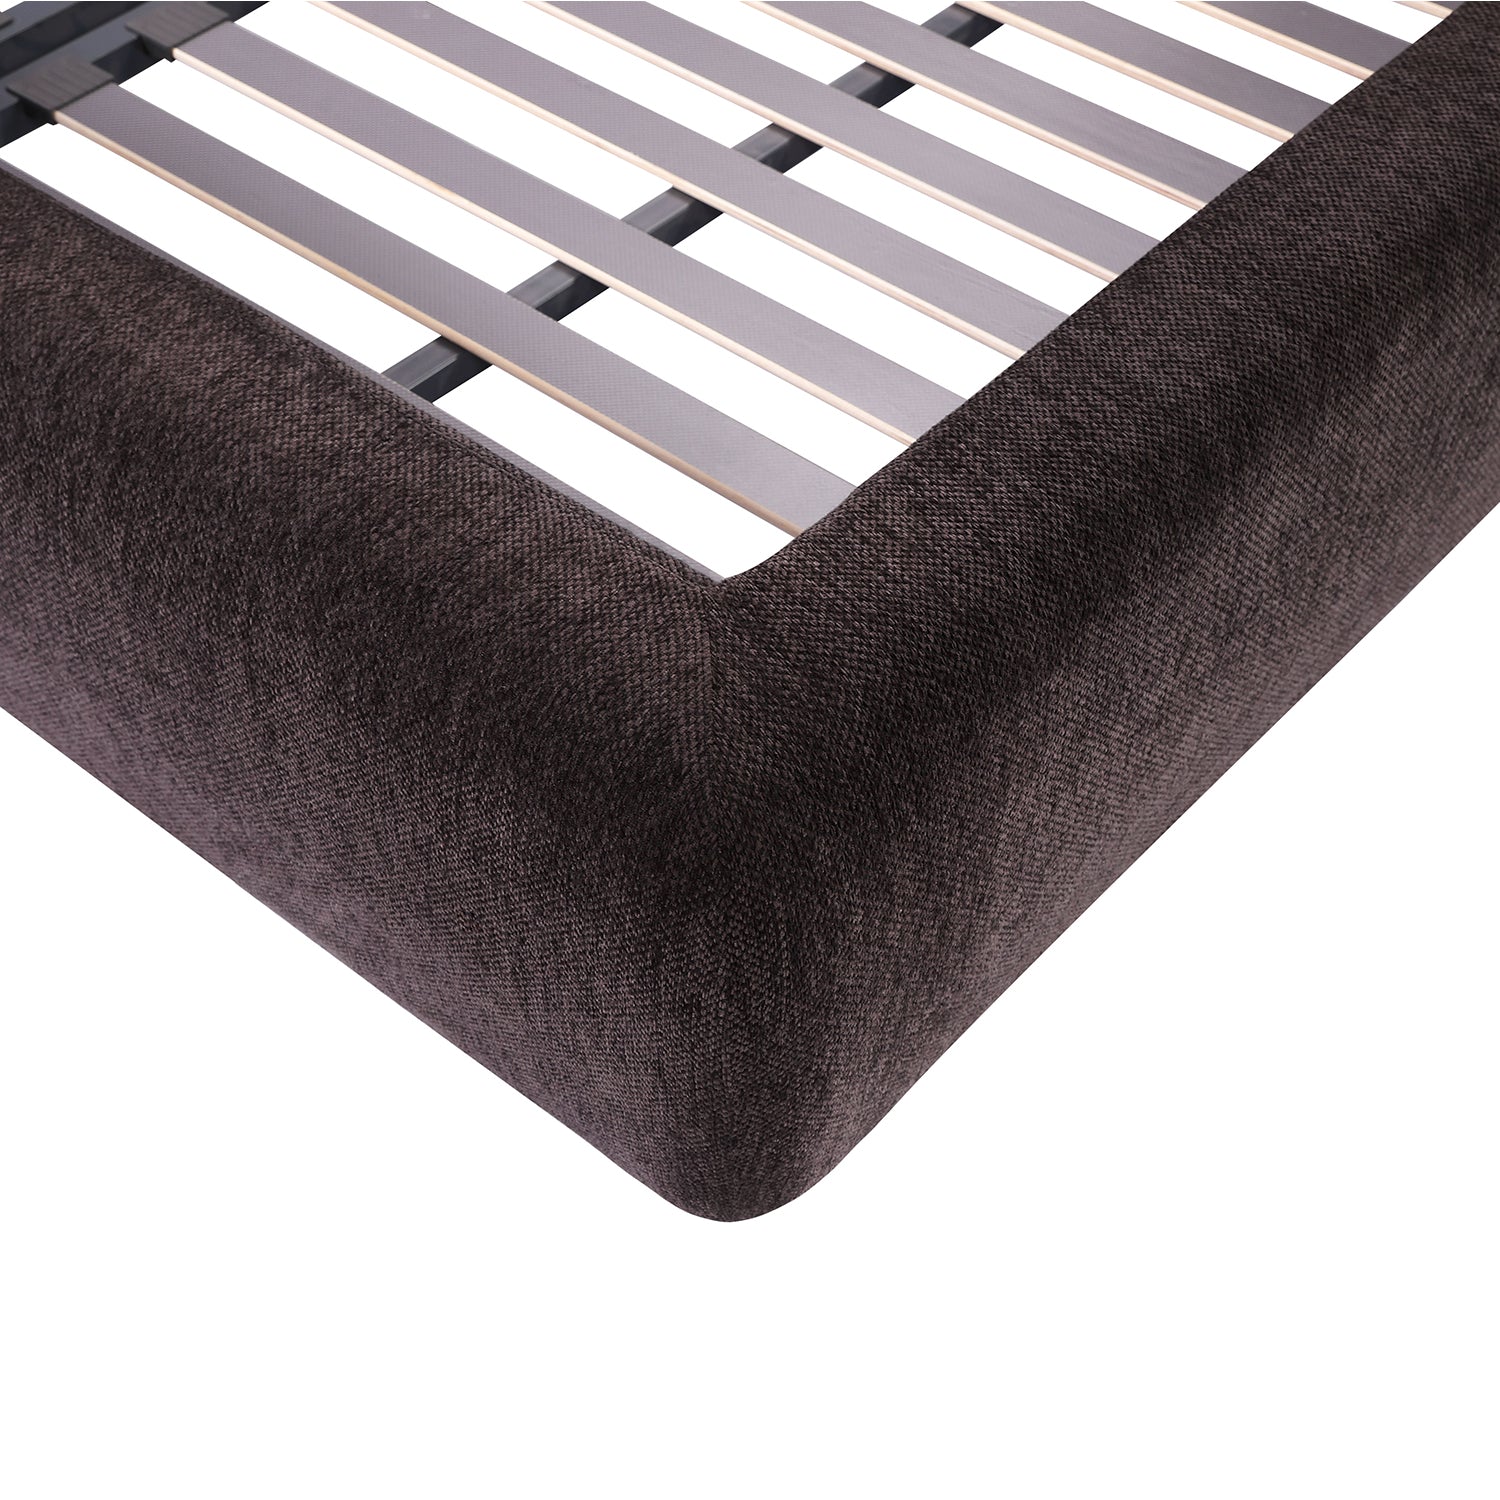 Close-up corner of DeRUCCI Bed Frame BZZ4 - 117 with thick, soft fabric-covered border and visible wooden slats for mattress support.